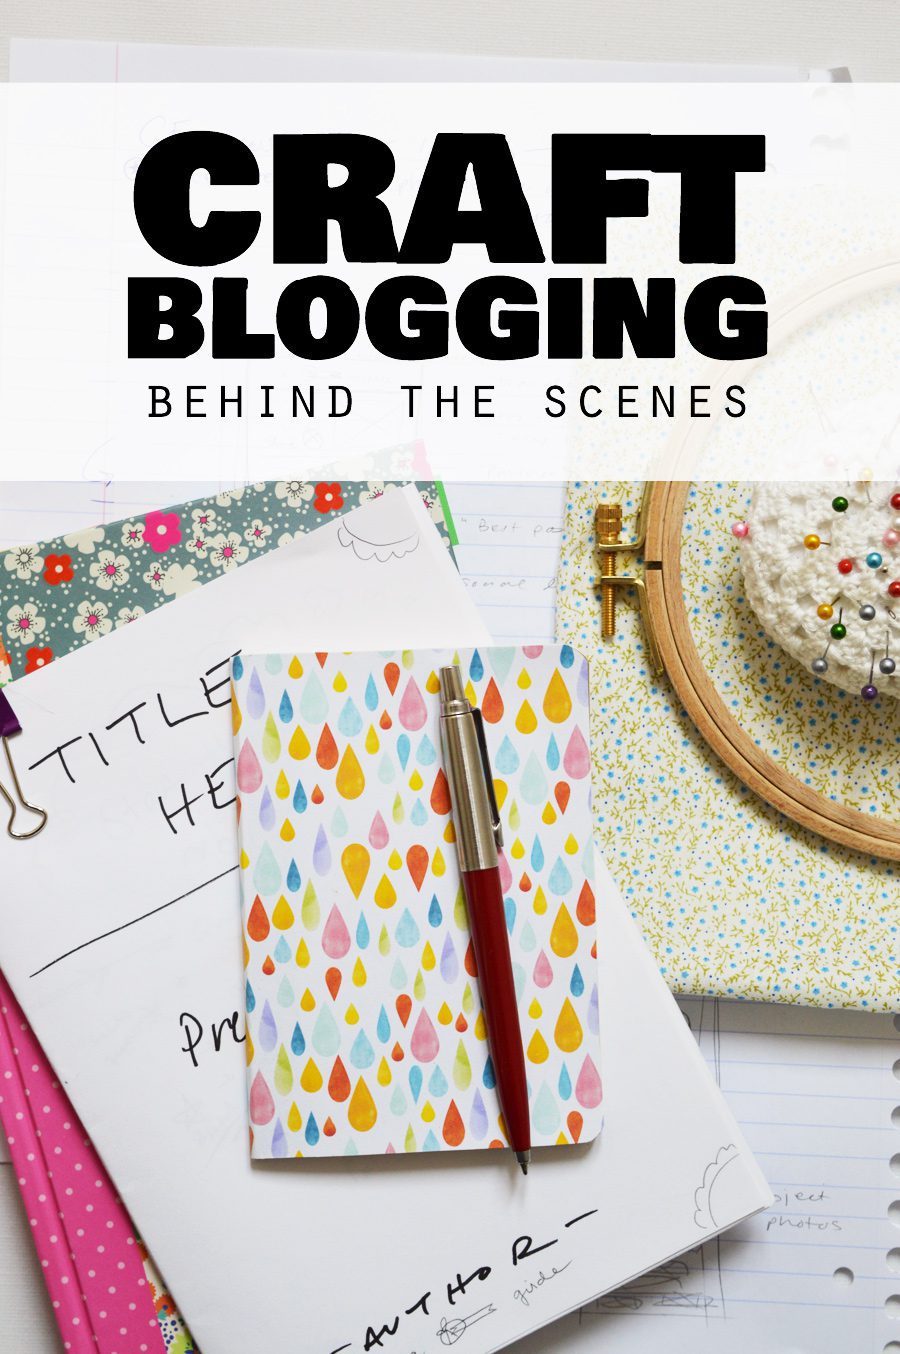 Behind the scenes of a craft blog | craftingfingers.co.uk